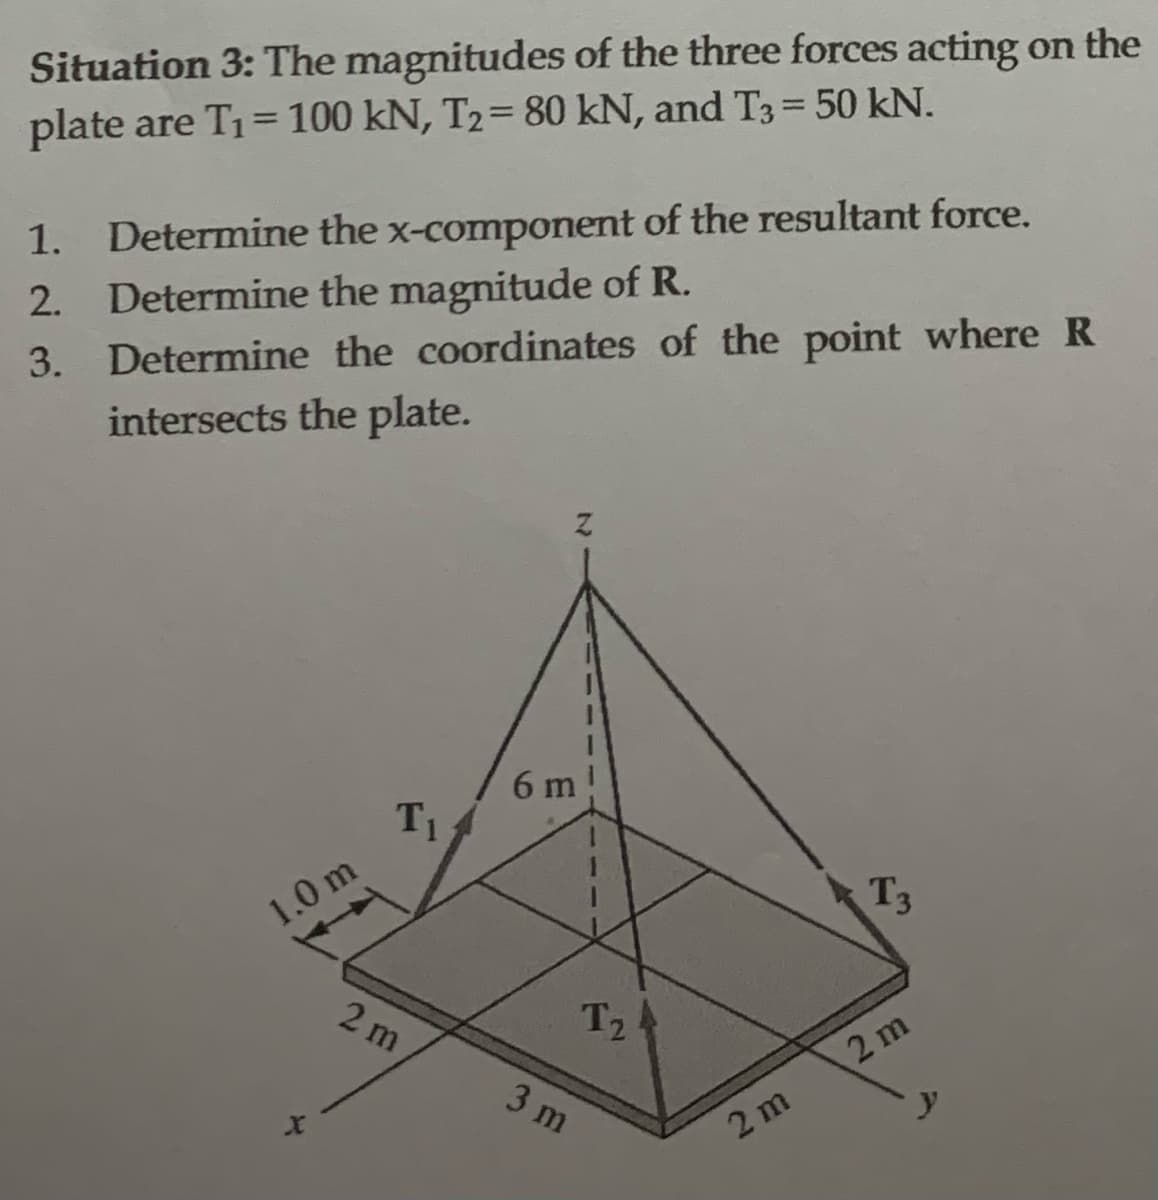 Situation 3: The magnitudes of the three forces acting on the
plate are T₁ = 100 kN, T2= 80 kN, and T3 = 50 kN.
1. Determine the x-component of the resultant force.
2. Determine the magnitude of R.
3. Determine the coordinates of the point where R
intersects the plate.
1.0 m
X
T₁
2 m
Z
6 m
T₂
3 m
2m
T3
2 m
y